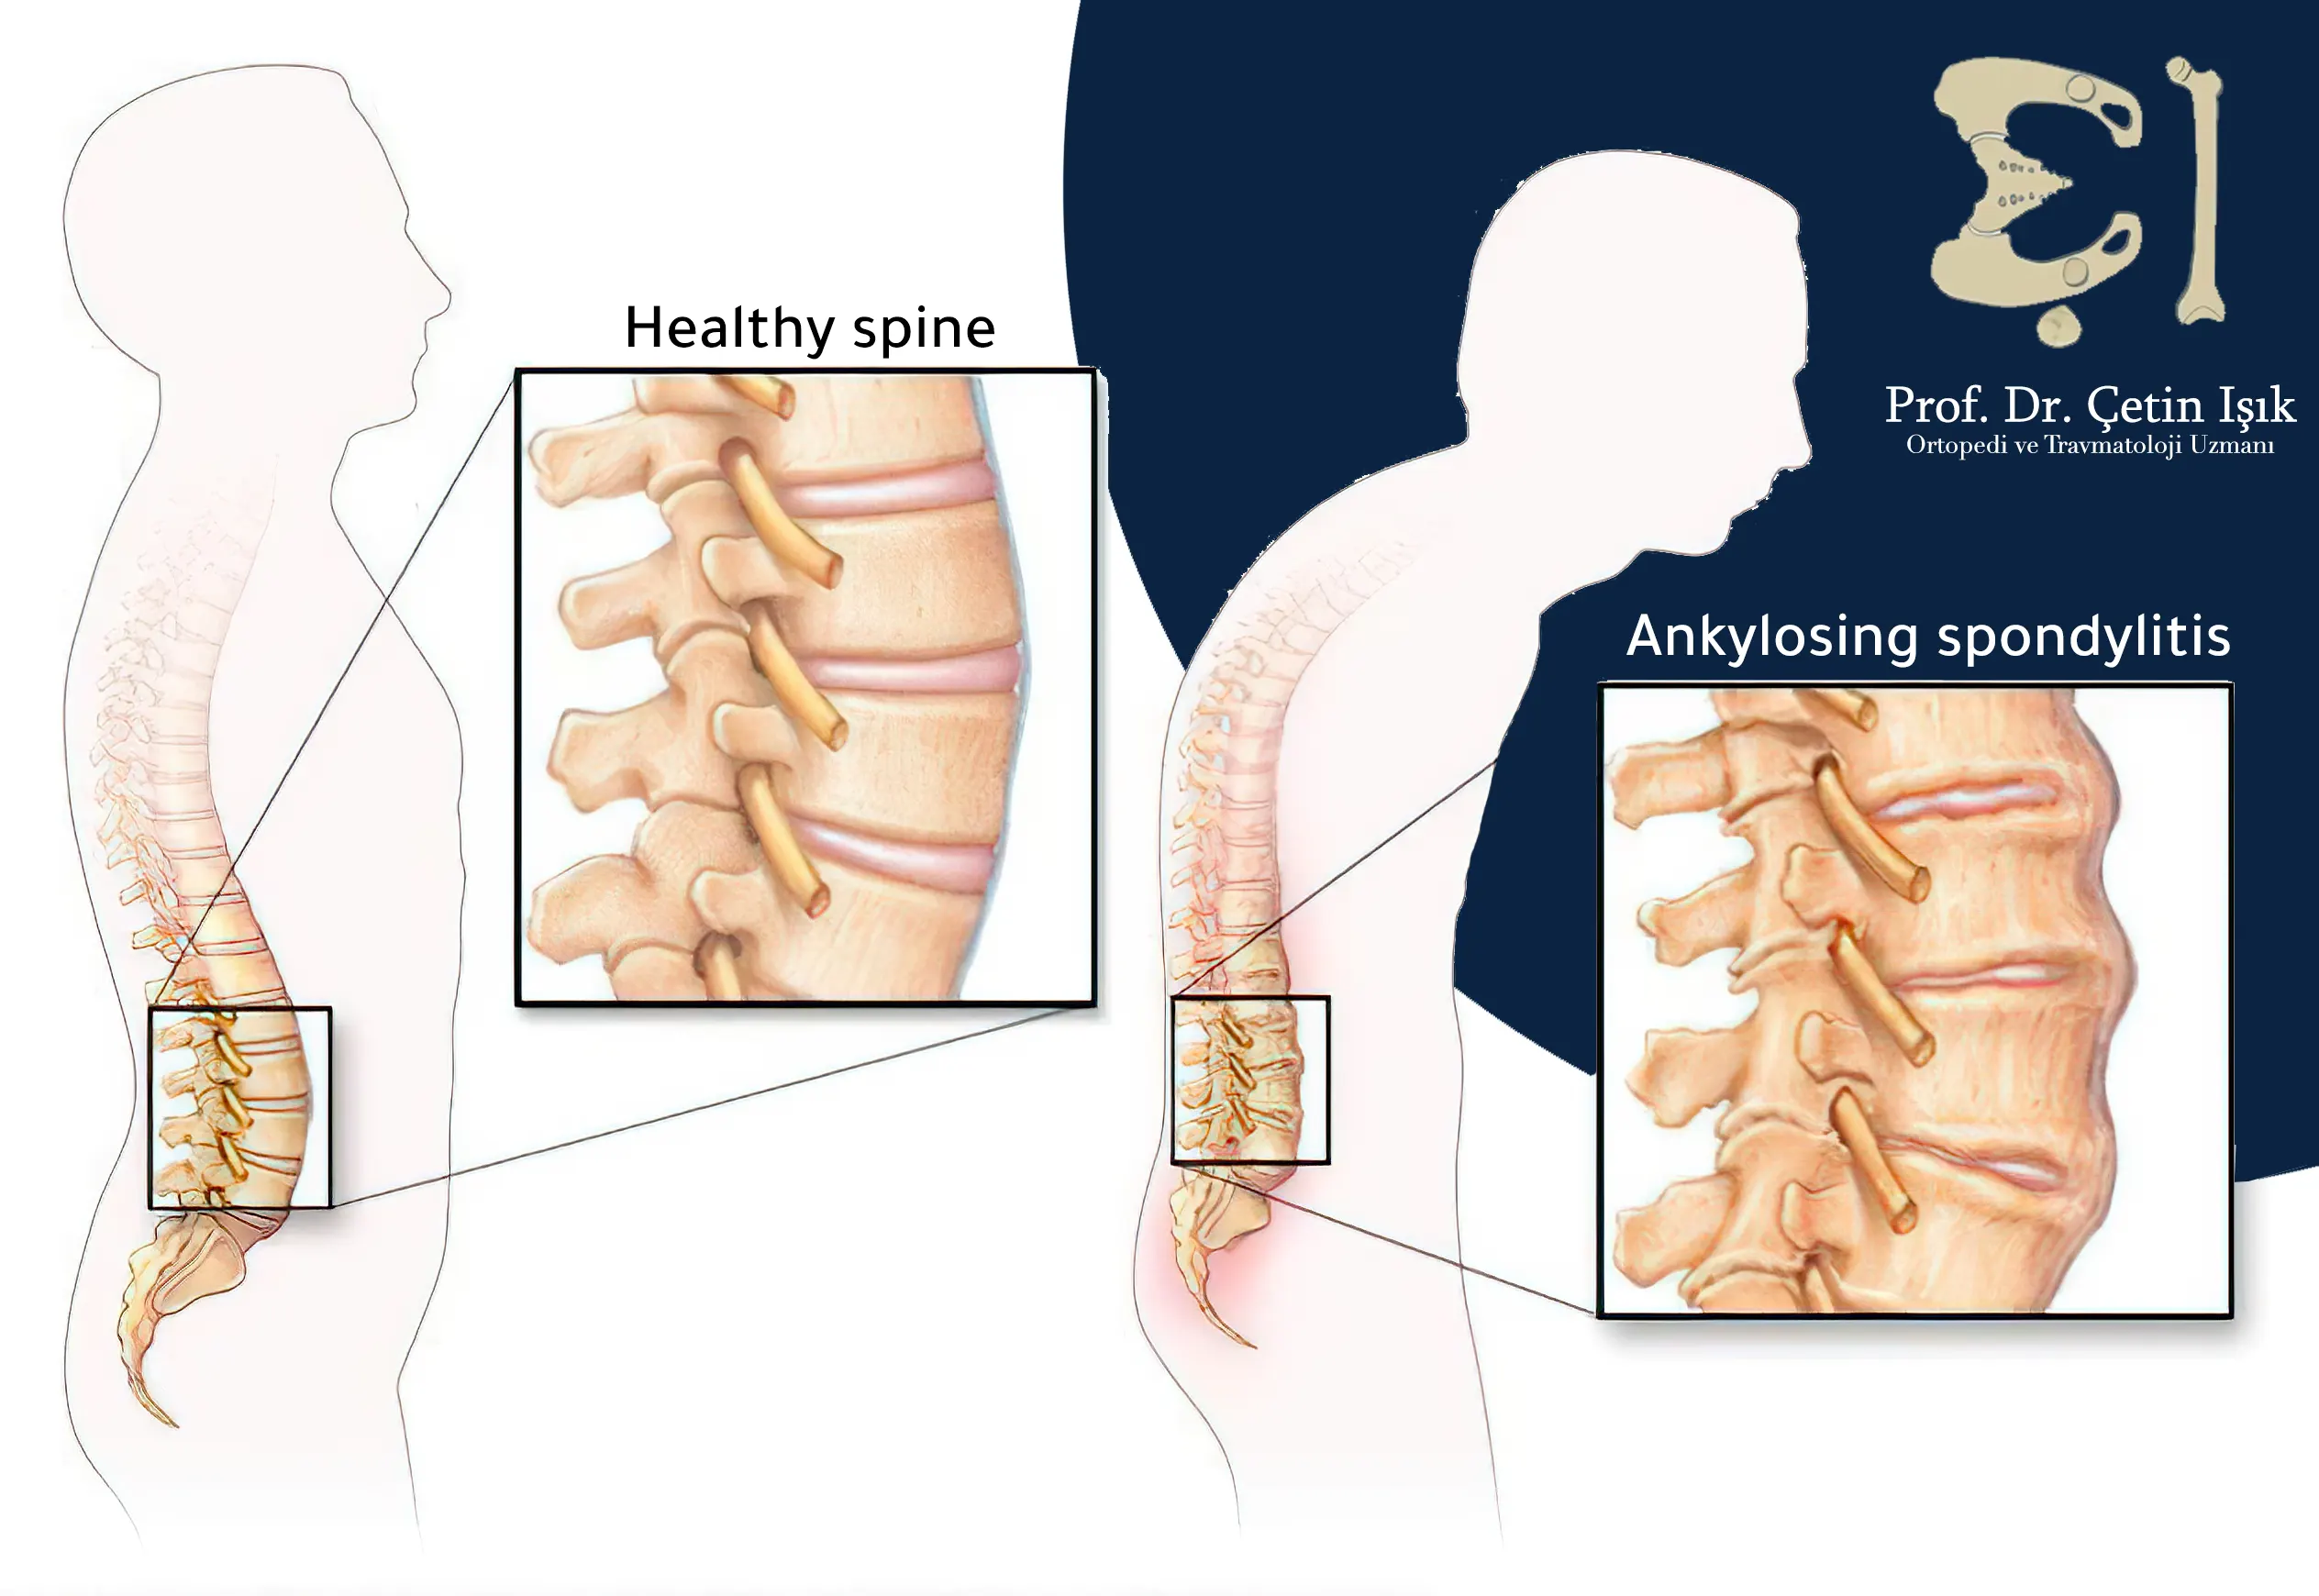 We note the formation of bones and sclerosis of the spine in ankylosing spondylitis